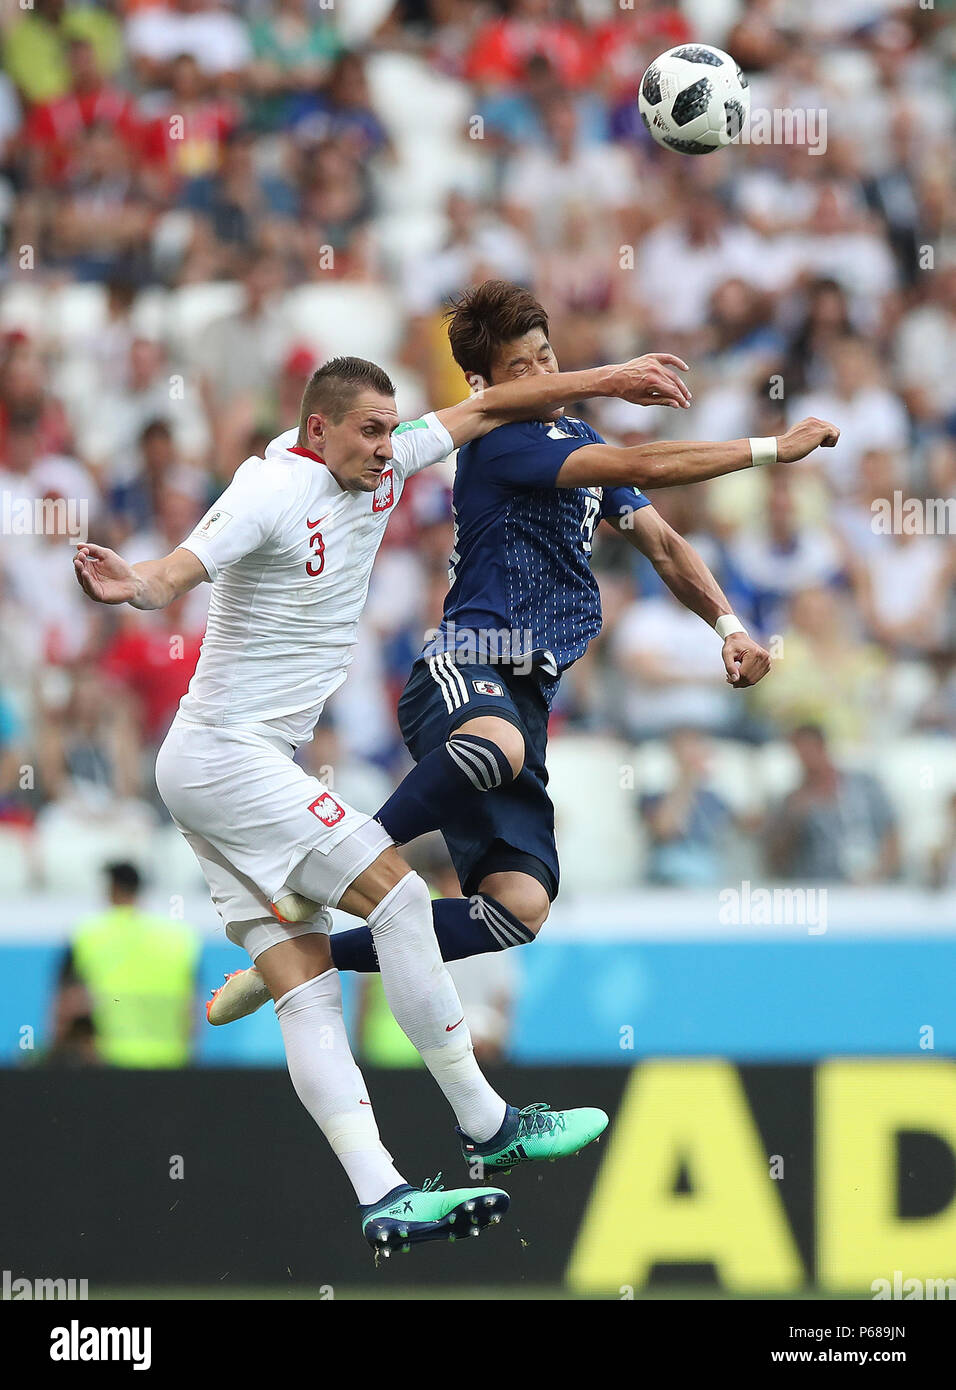 Volgograd, Russia. 28th June, 2018. Hiroki Sakai (R) of Japan vies with Artur Jedrzejczyk of Poland during the 2018 FIFA World Cup Group H match between Japan and Poland in Volgograd, Russia, June 28, 2018. Credit: Wu Zhuang/Xinhua/Alamy Live News Stock Photo